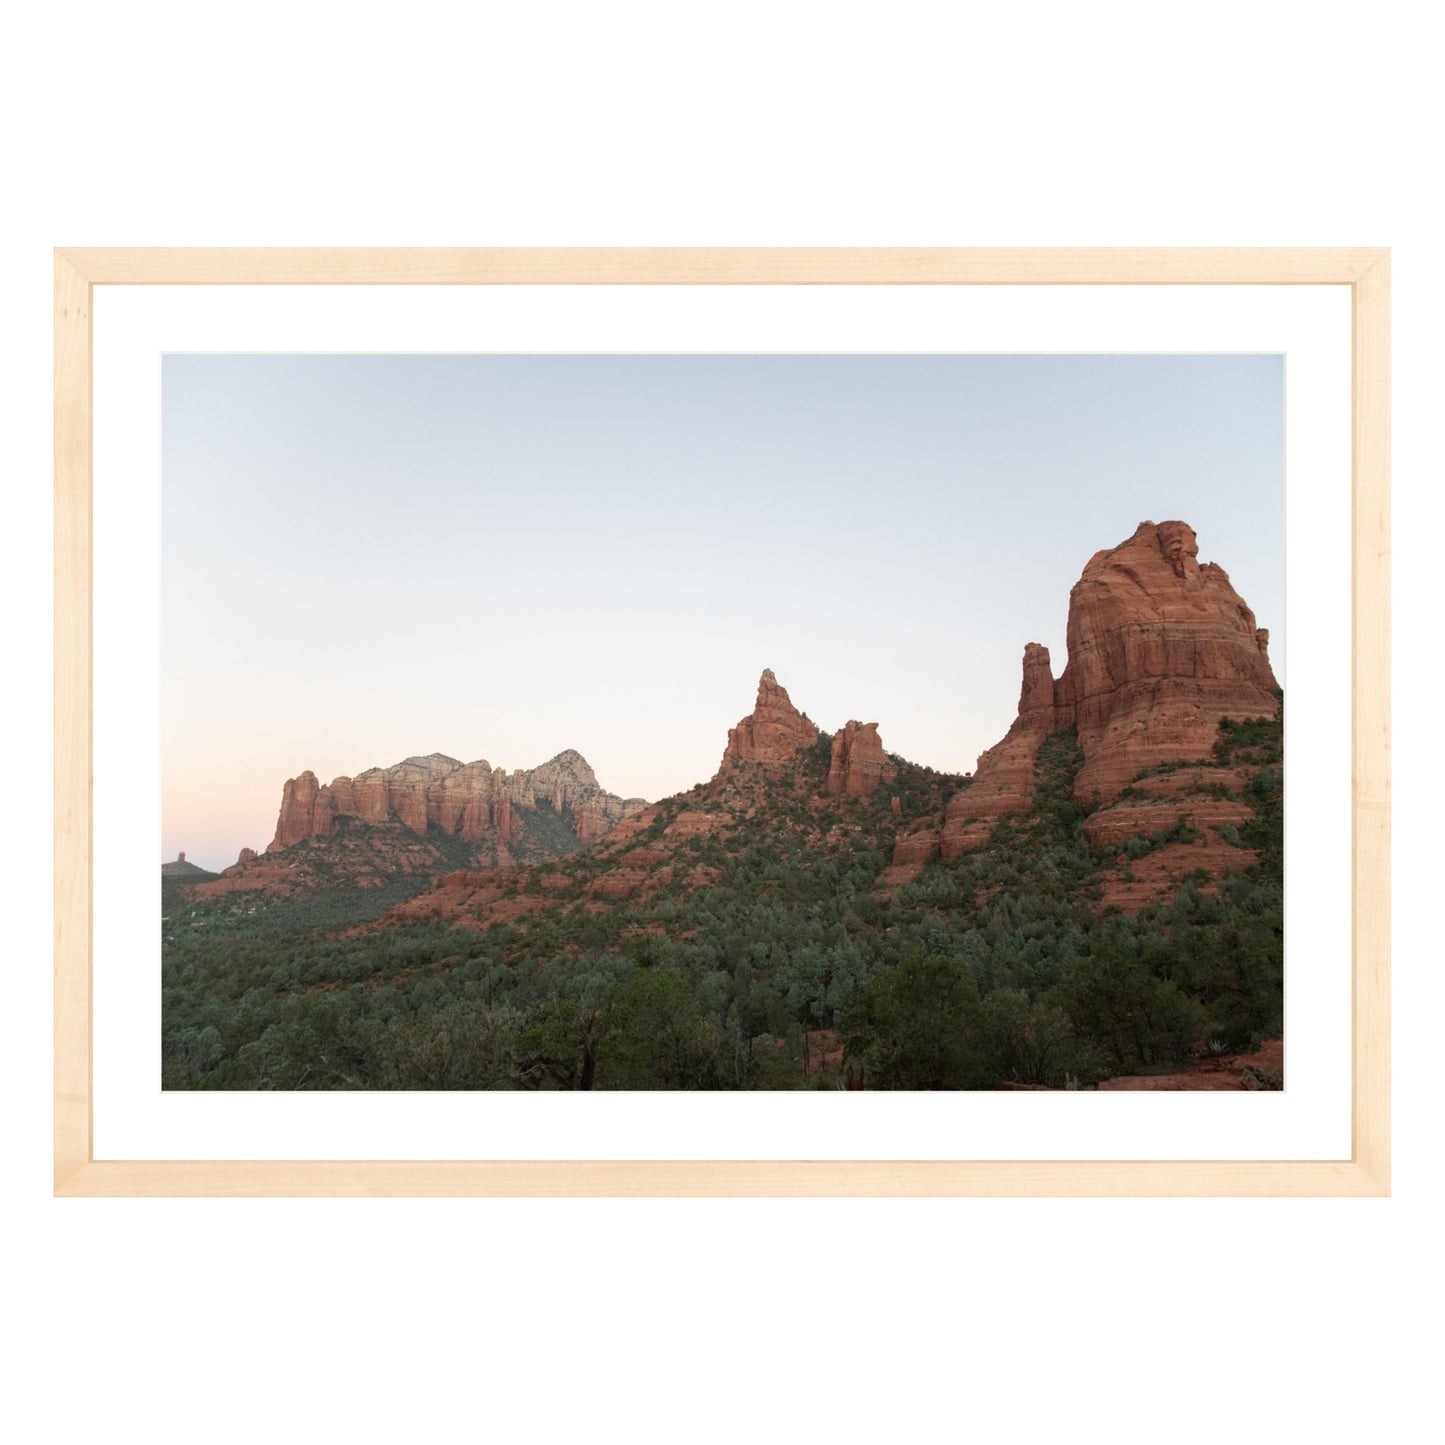 Photograph of Boynton Canyon in Sedona Arizona framed in natural wood with white mat